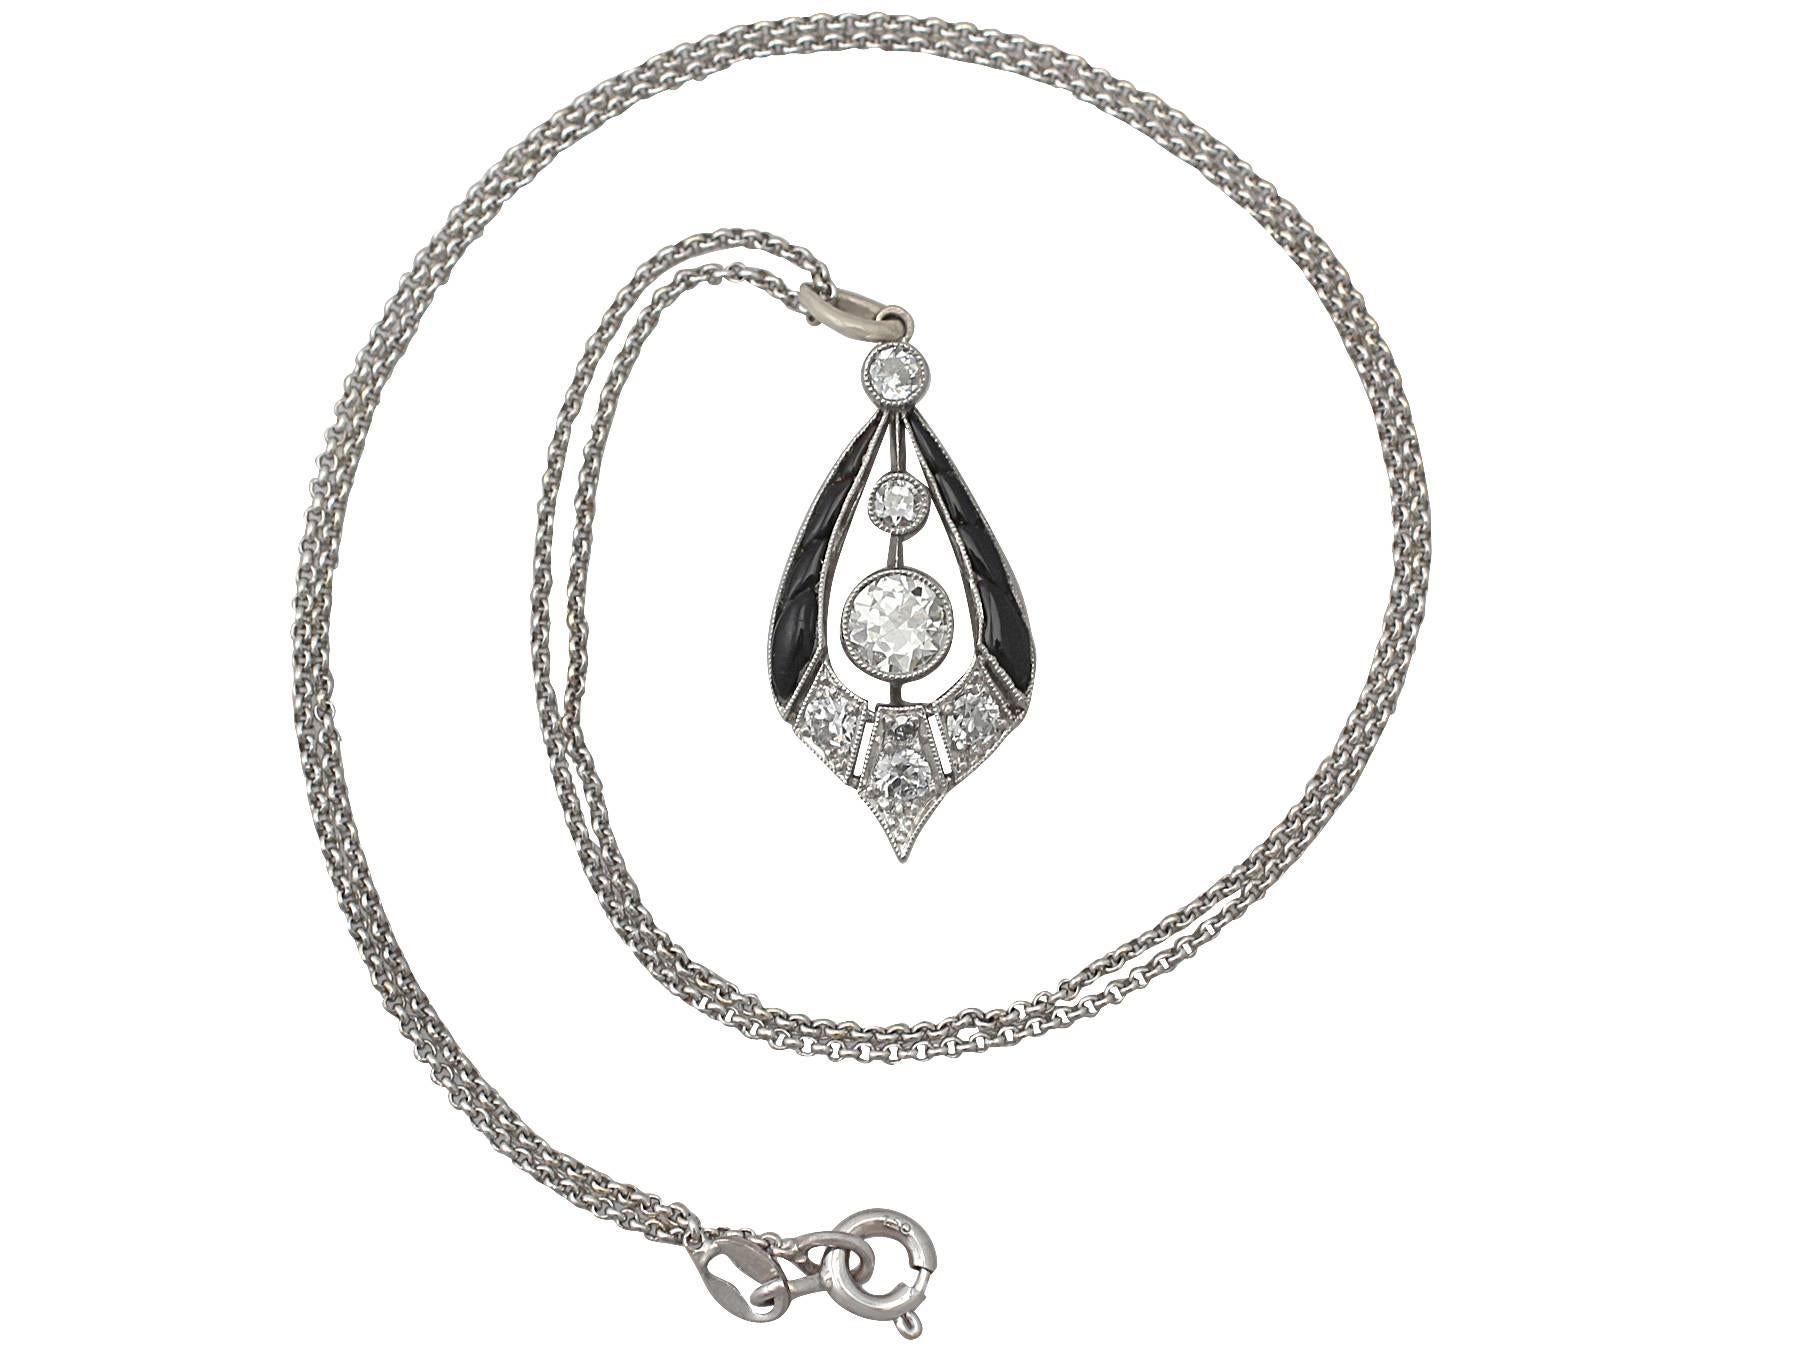 A stunning, fine and impressive original Art Deco, 0.77 carat diamond and onyx pendant in platinum; part of our diverse antique jewelry and estate jewelry collections

This stunning 1920's diamond and onyx pendant has been crafted in platinum.

The